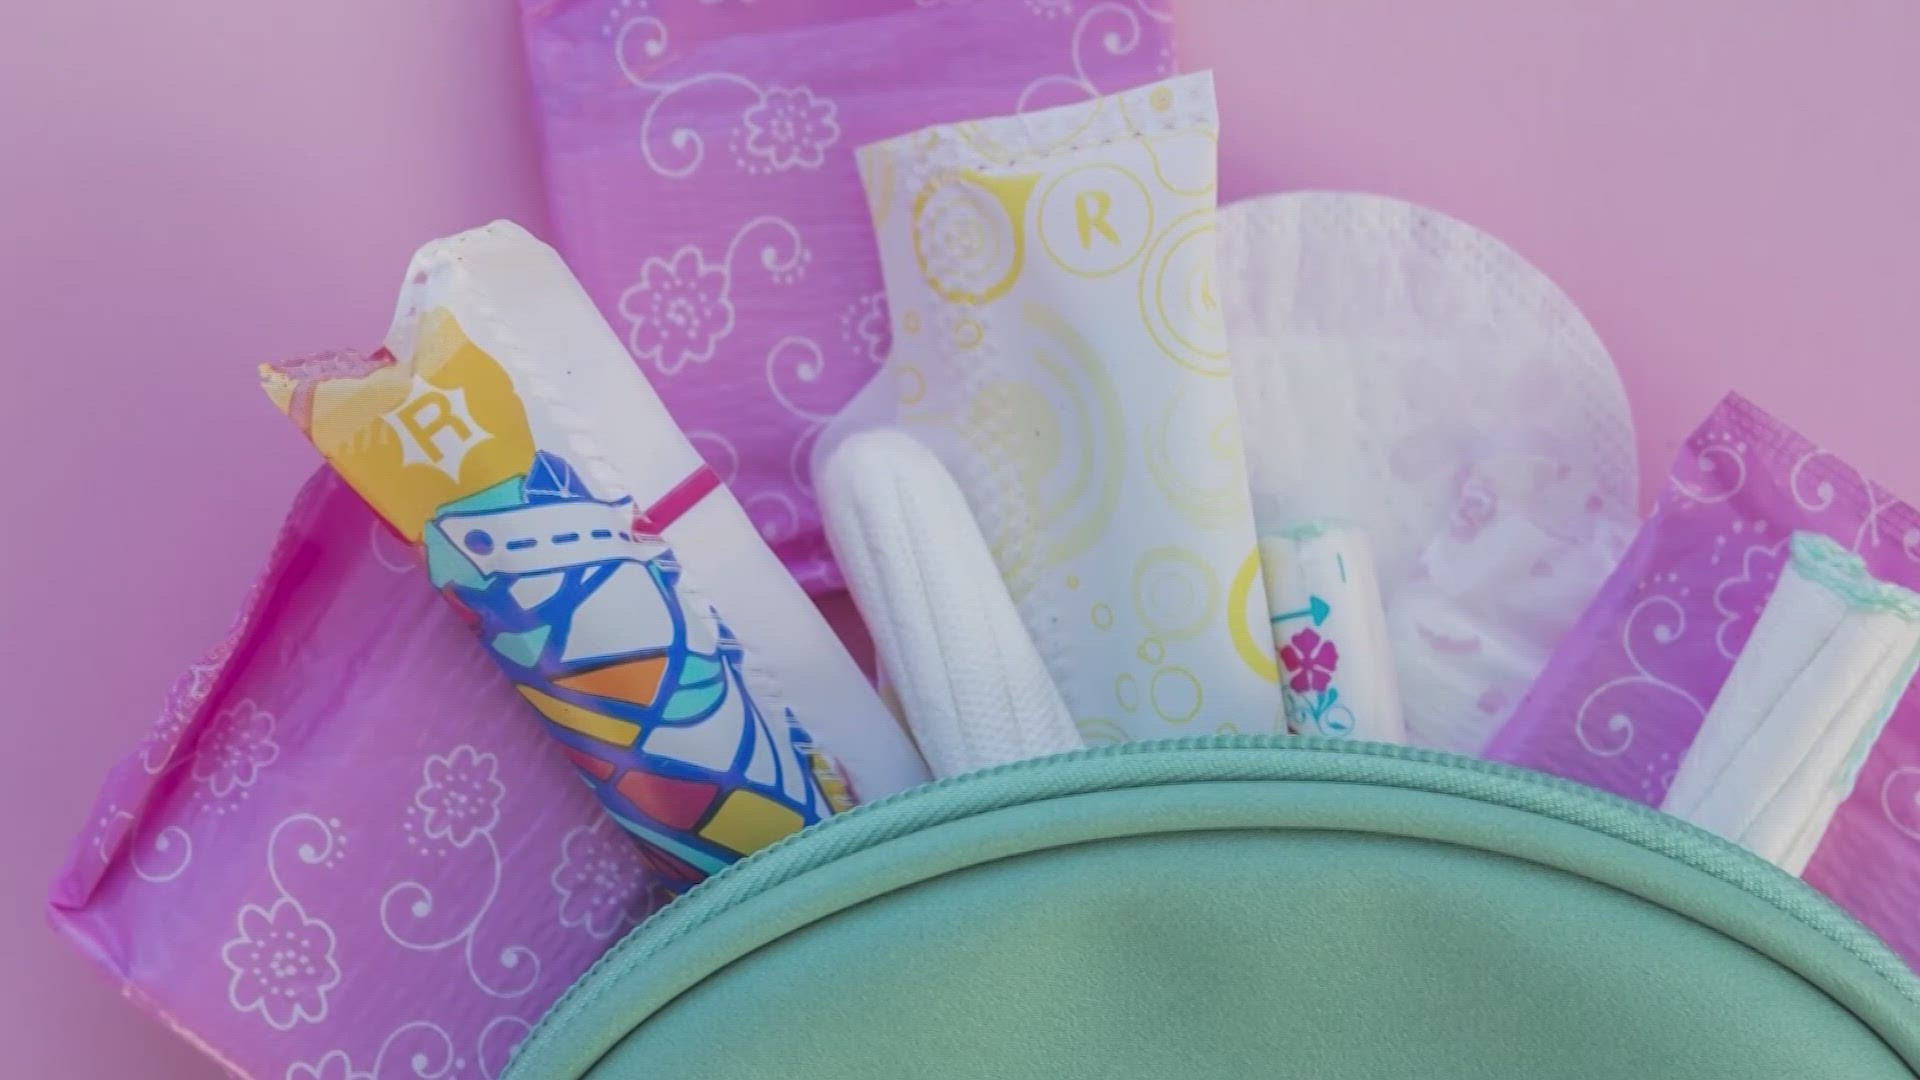 The City of Houston will soon provide feminine hygiene products at more than 30 city-run buildings.